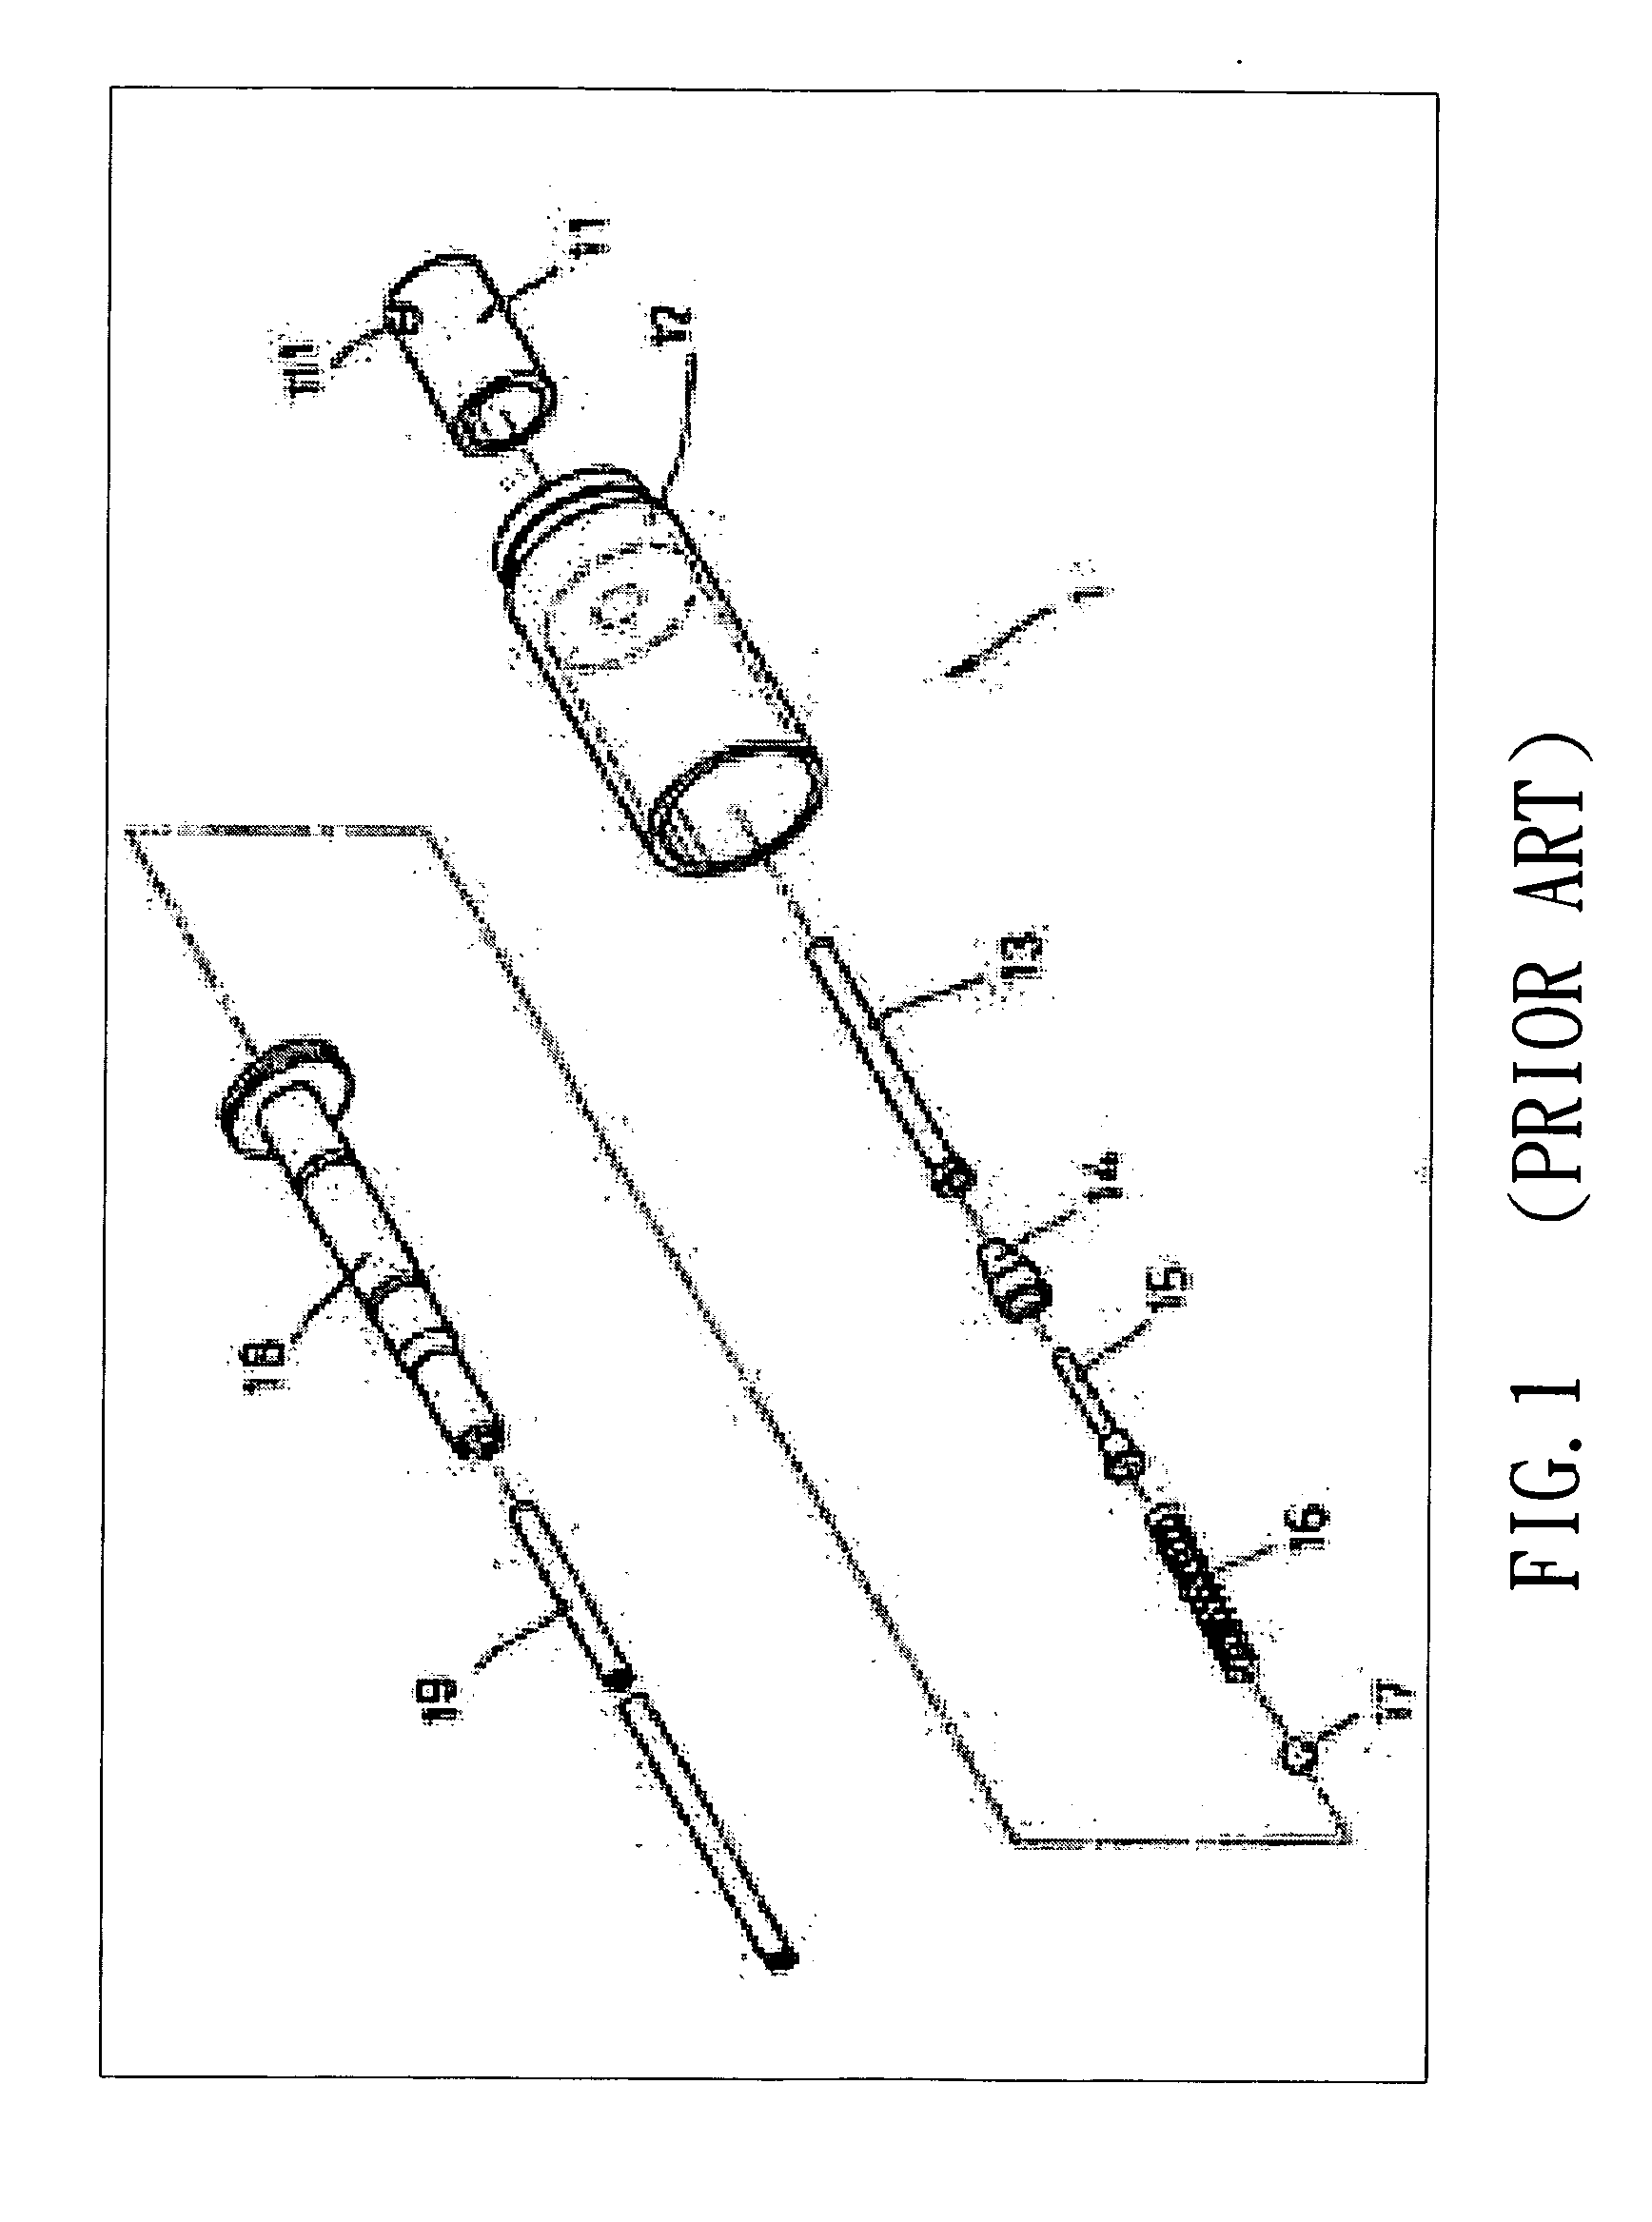 Piston device and a fluid/gas drawing apparatus and a foam producing apparatus using such piston device